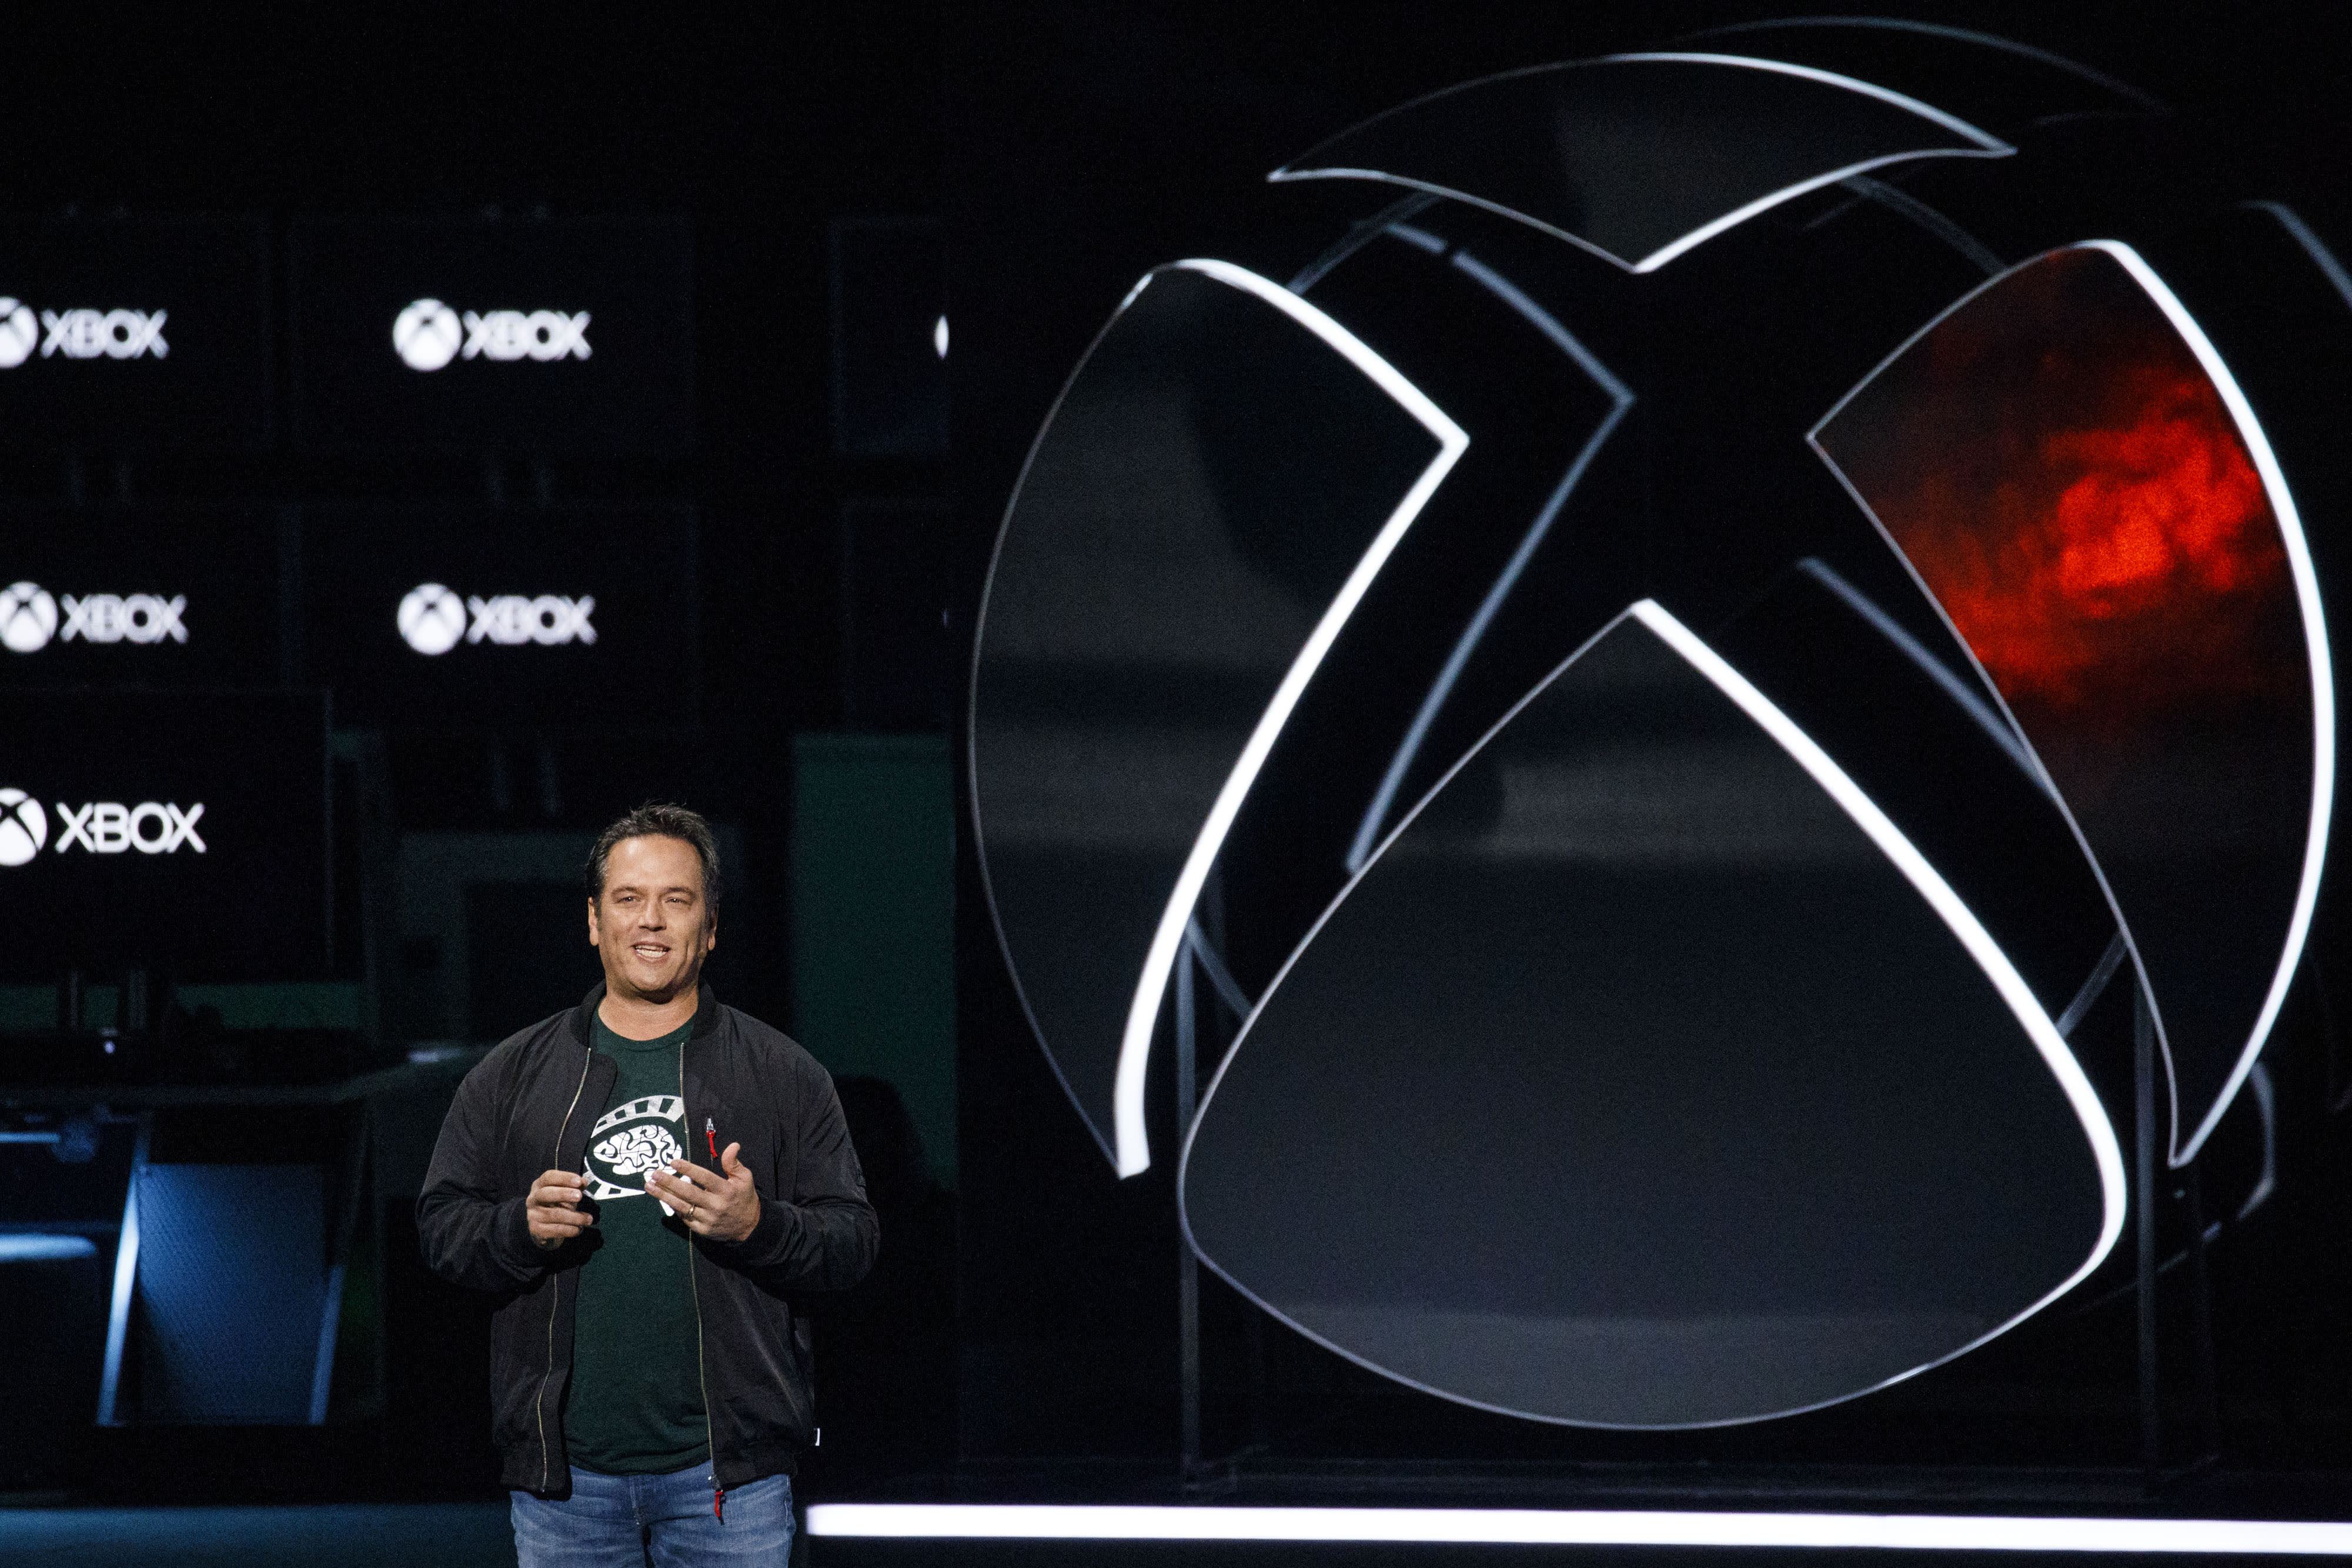 Xbox Game Pass is 'Steady' with No Growth says Phil Spencer